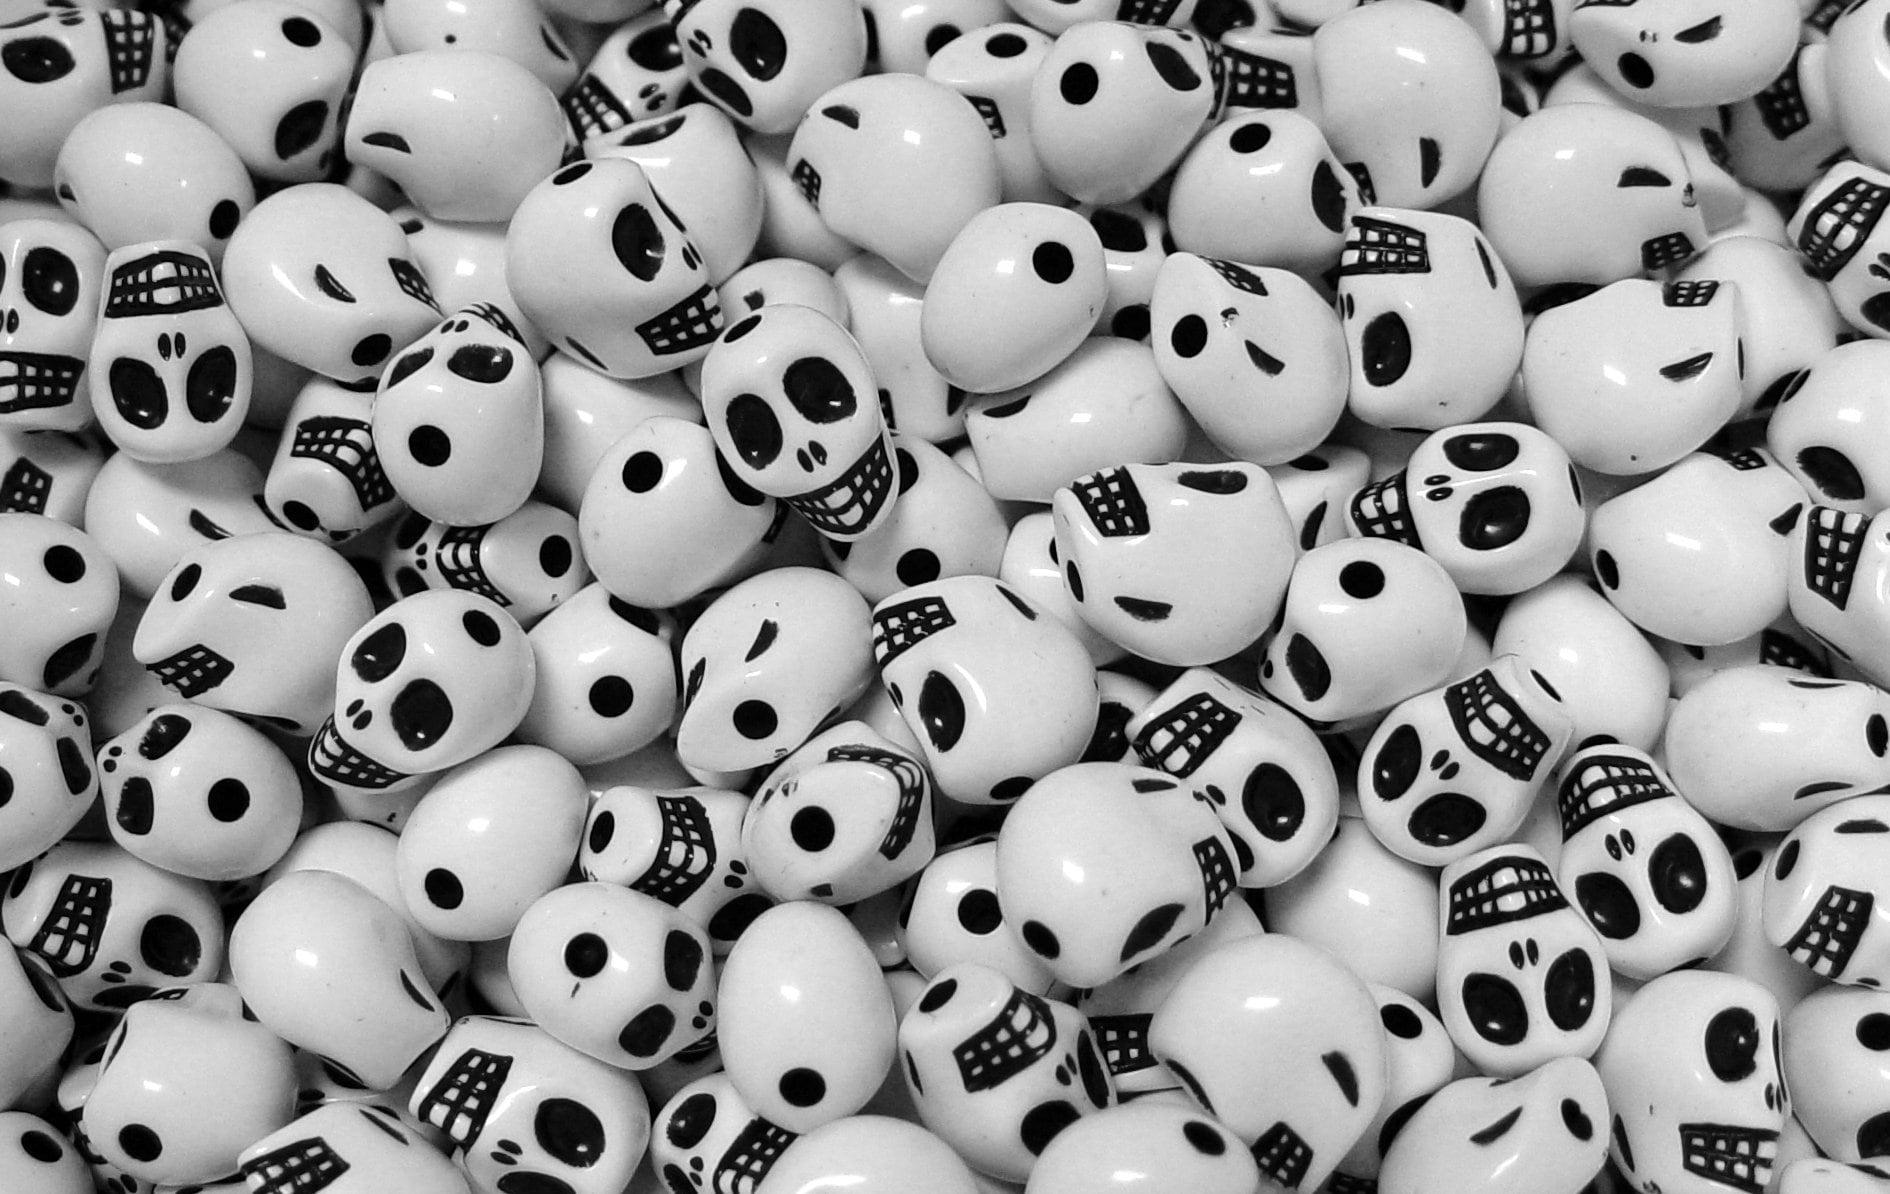 JOLLY STORE Crafts Skull Beads Antiqued Ivory Color